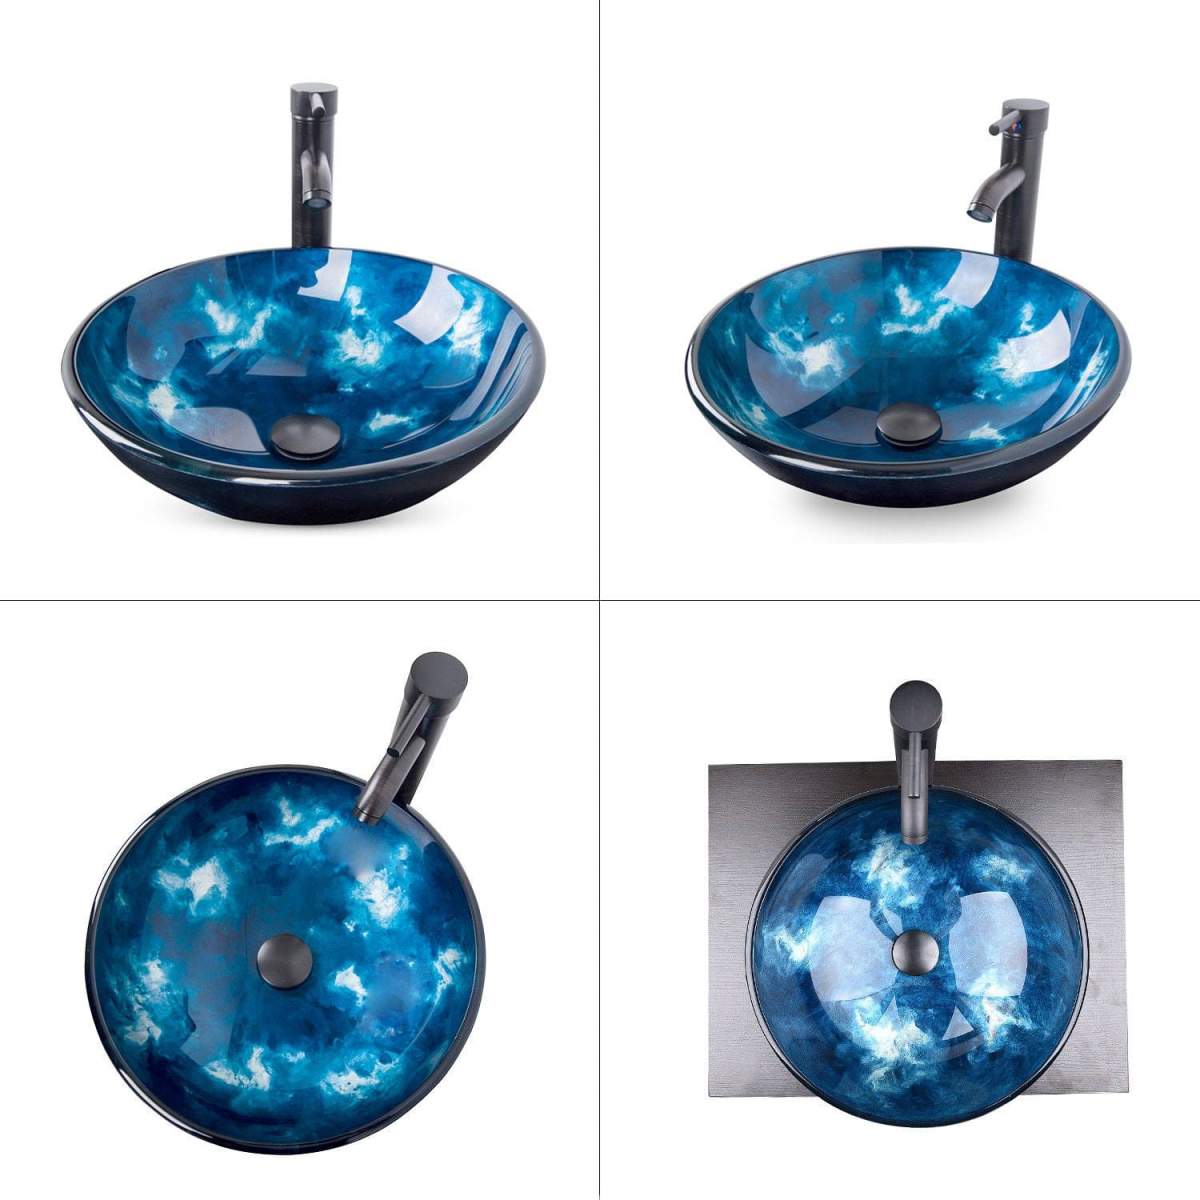 Four angle views of Elecwish ocean blue round sink